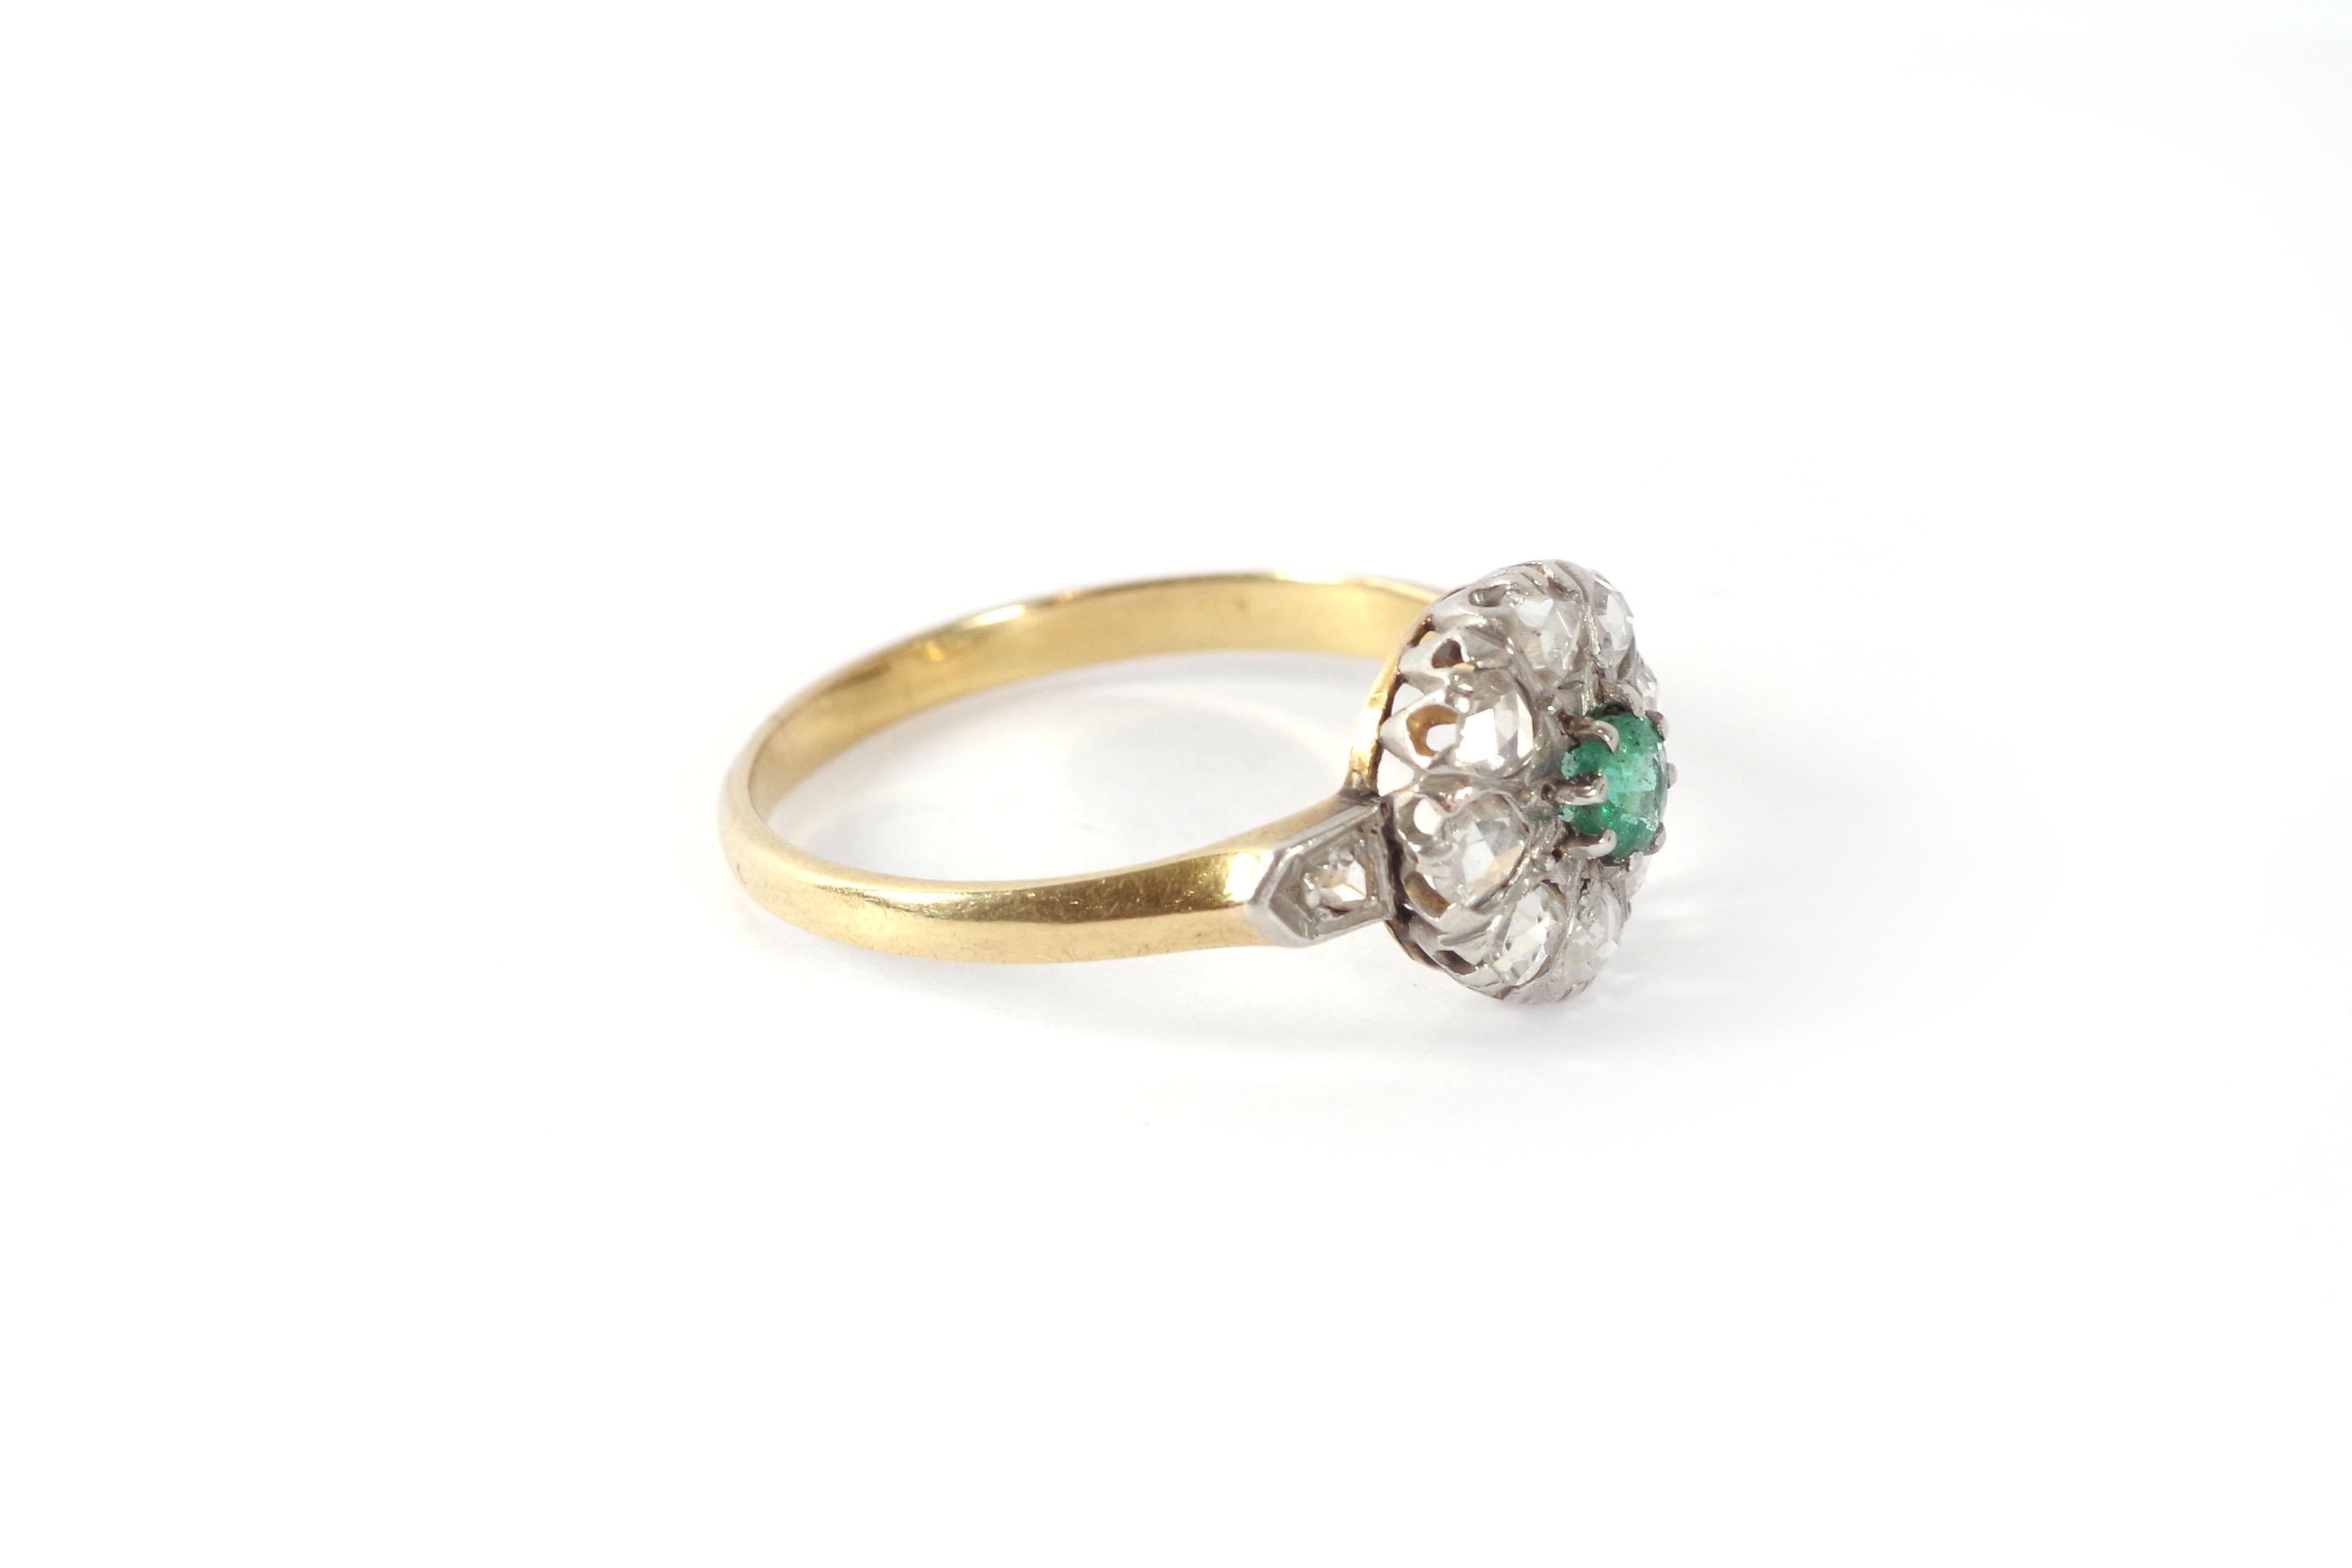 Belle Époque French cluster emerald ring in 18 karat pink gold and platinum